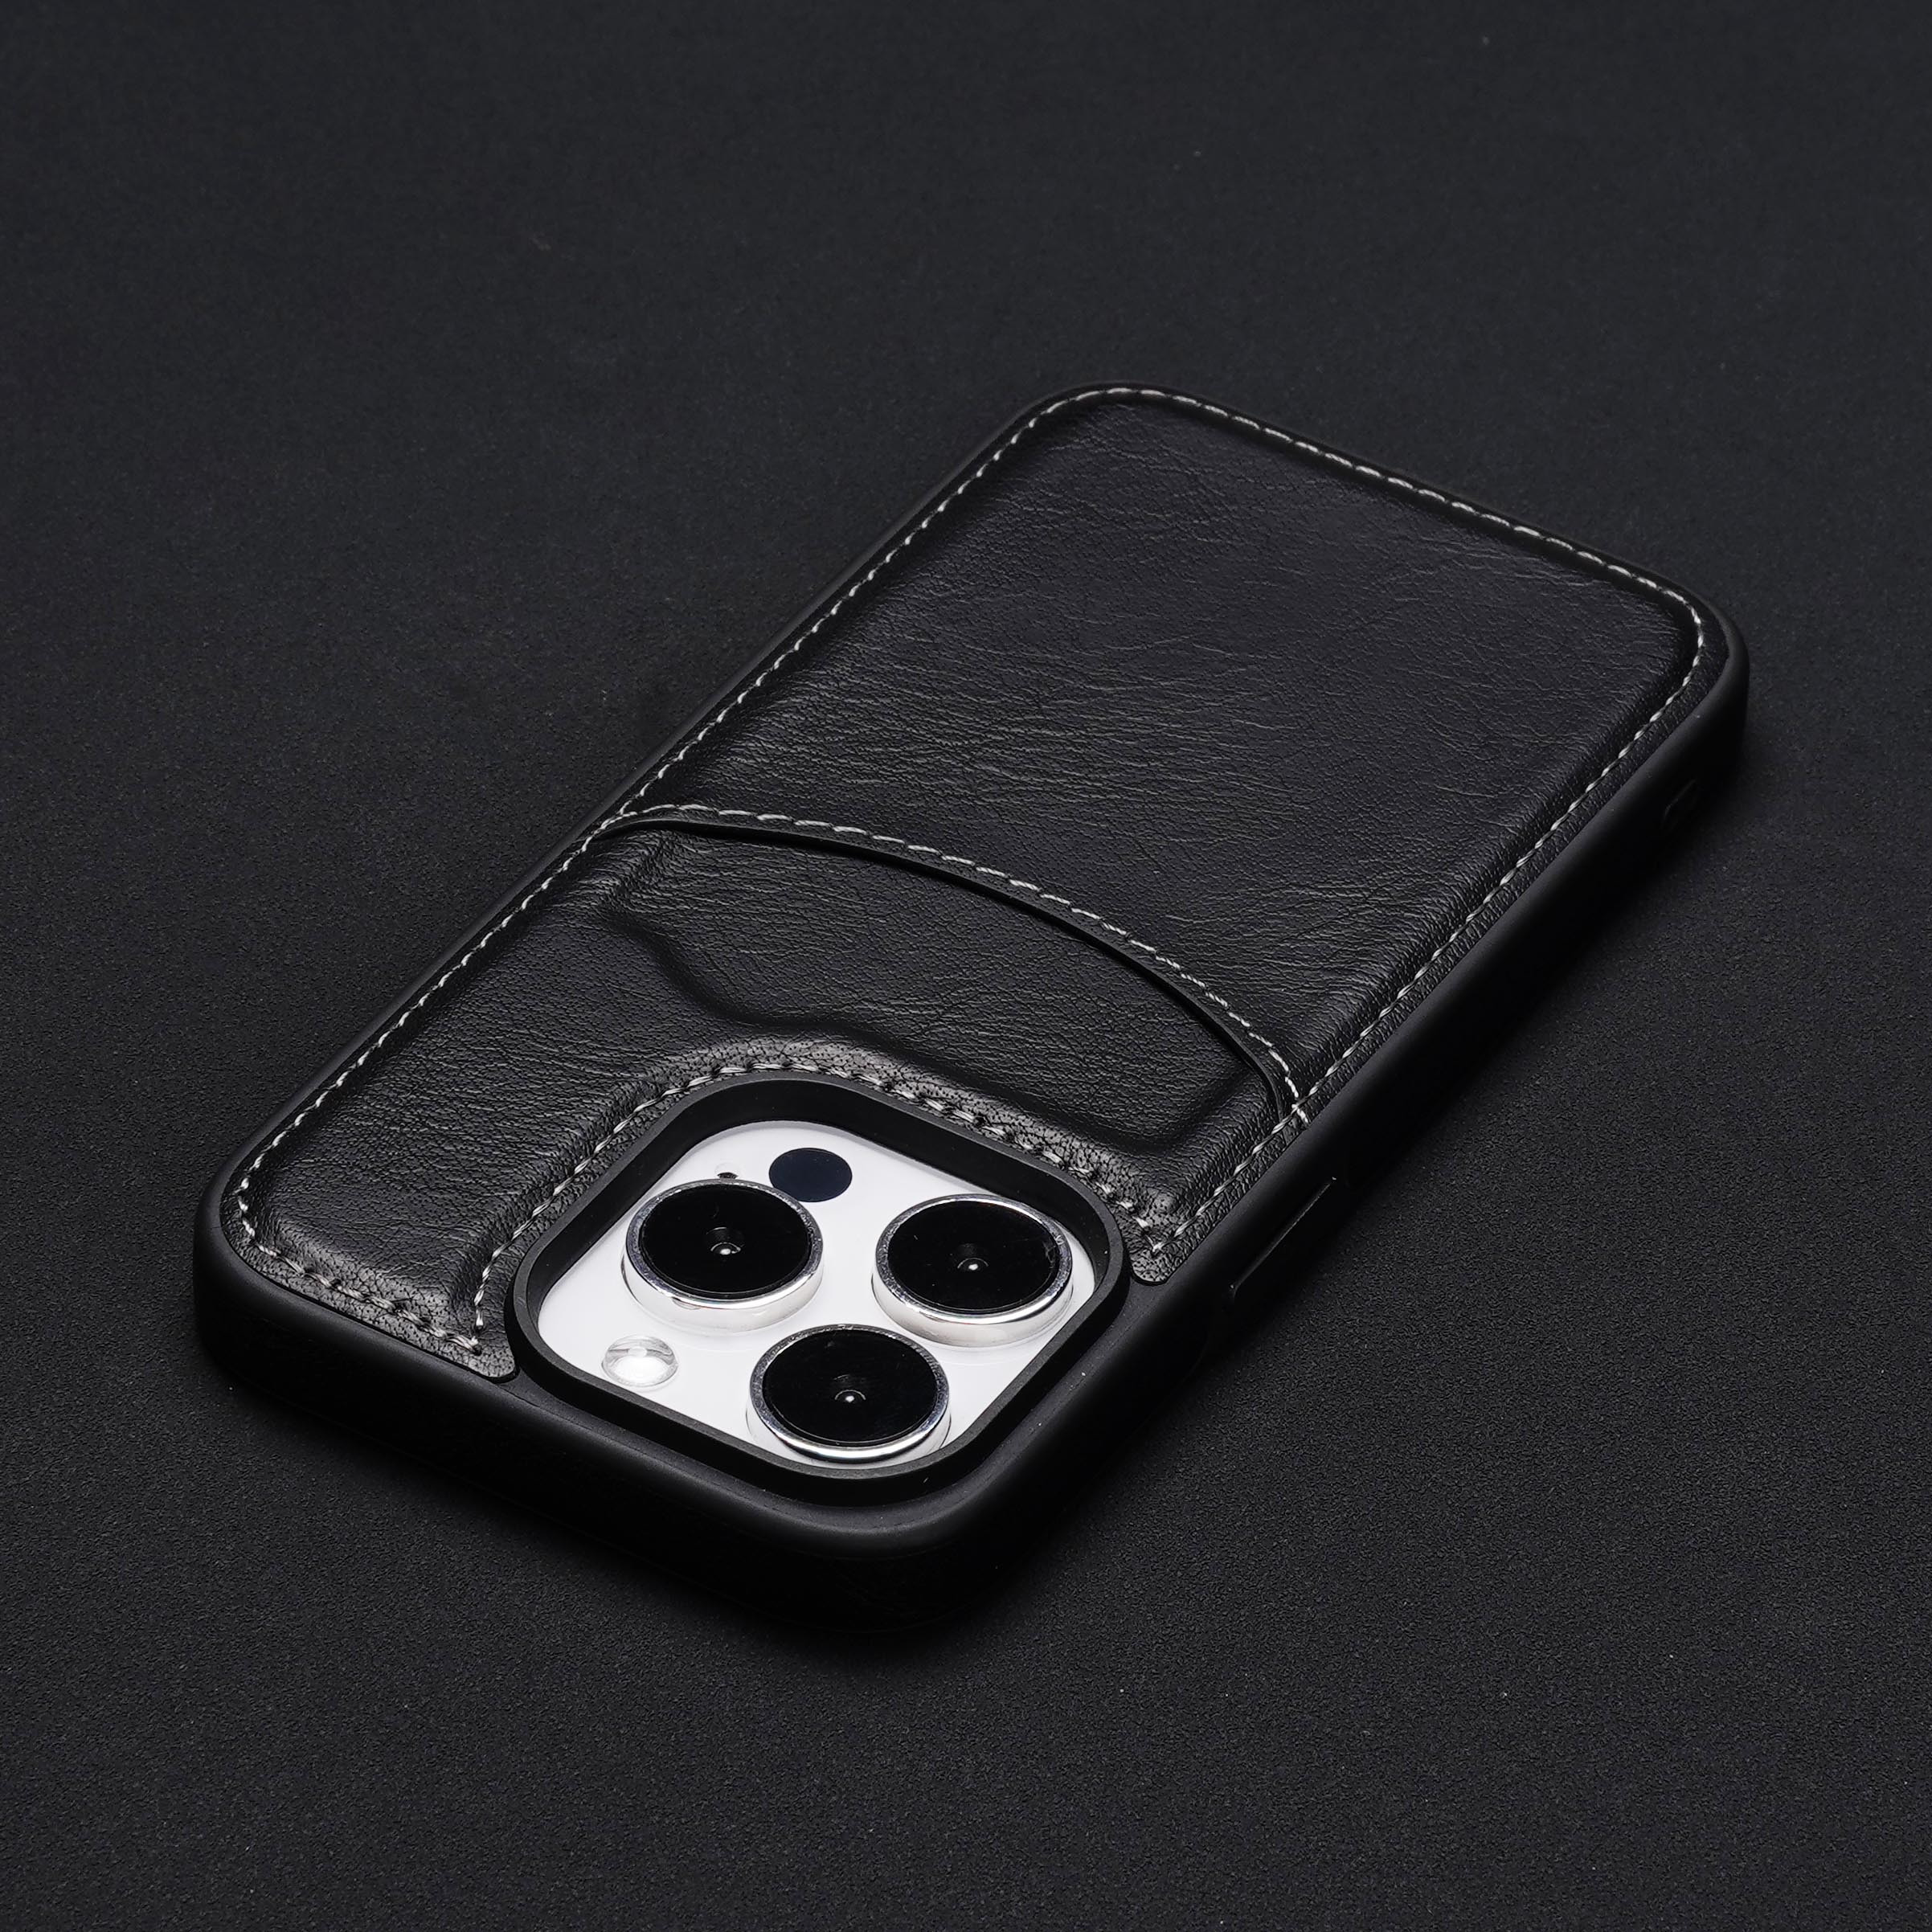 Fashion Black Leather Card Holder Wallet Phone Case for iPhone 11